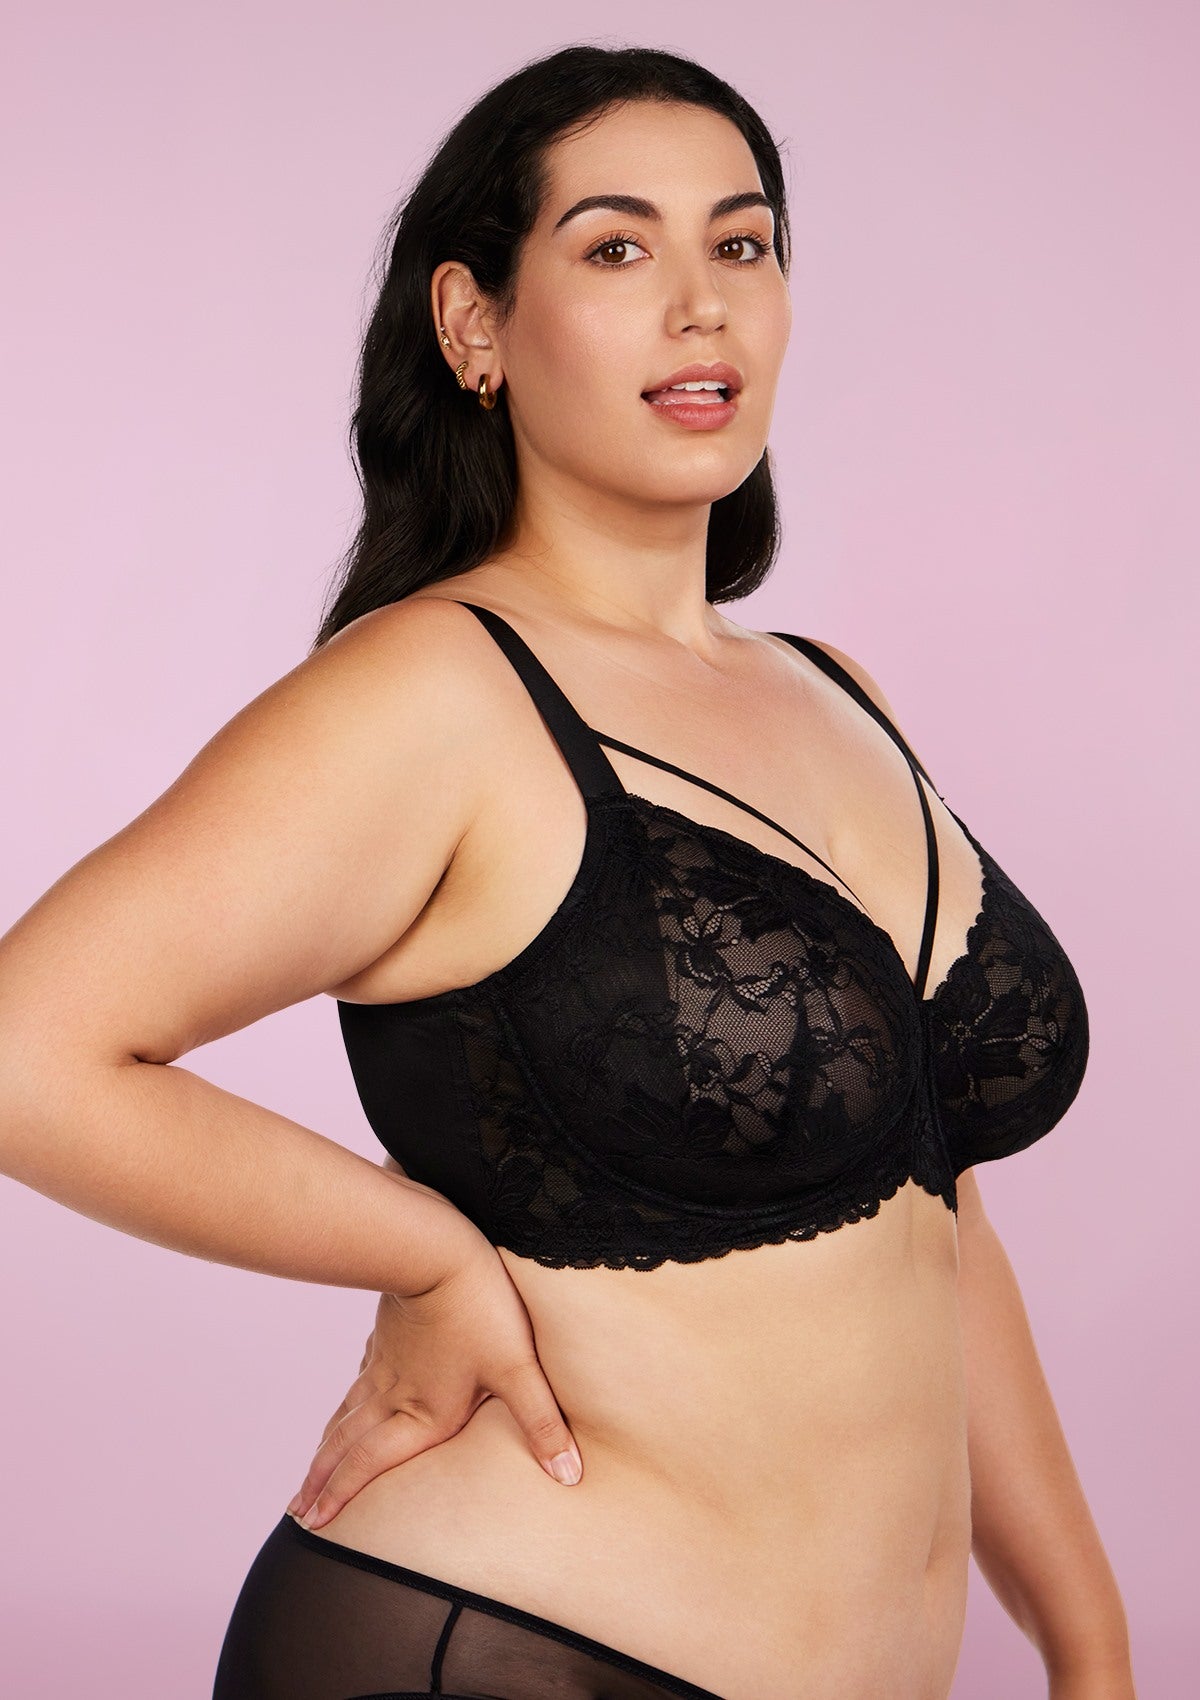 HSIA Pretty In Petals Bra - Plus Size Lingerie For Comfrot And Support - Black / 46 / DDD/F